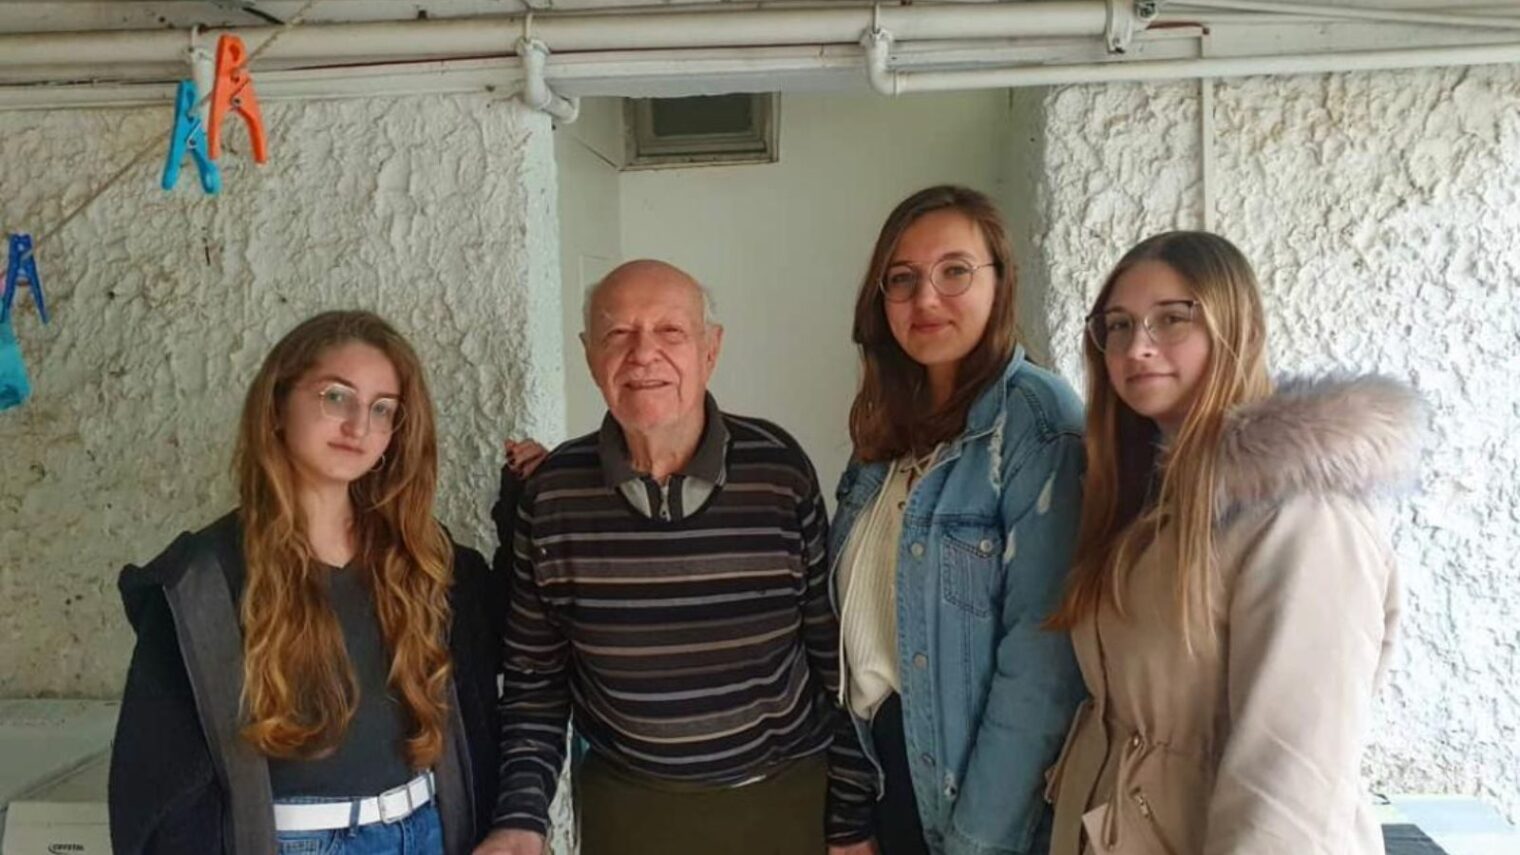 Teenage volunteers visit an elderly person in the southern city of Ashkelon. Photo: courtesy